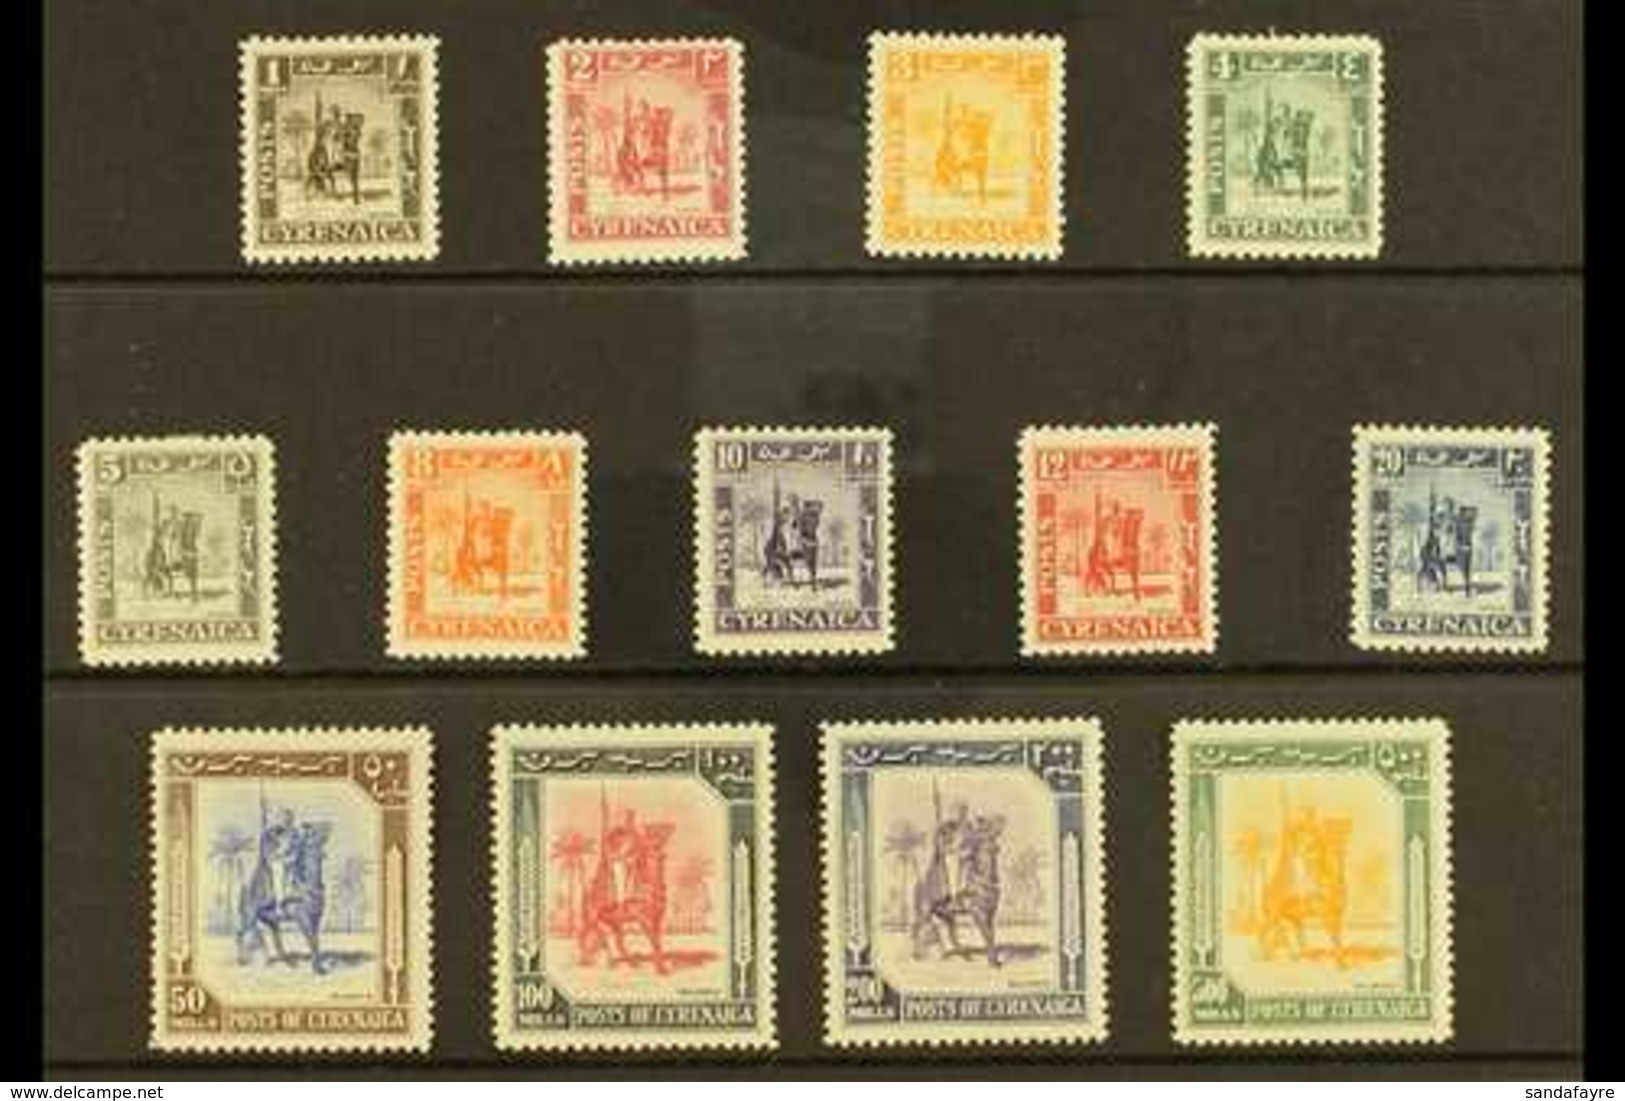 CYRENAICA 1950 "Mounted Warrior" Complete Definitive Set, SG 136/148, Very Fine Mint. (13 Stamps) For More Images, Pleas - Italian Eastern Africa